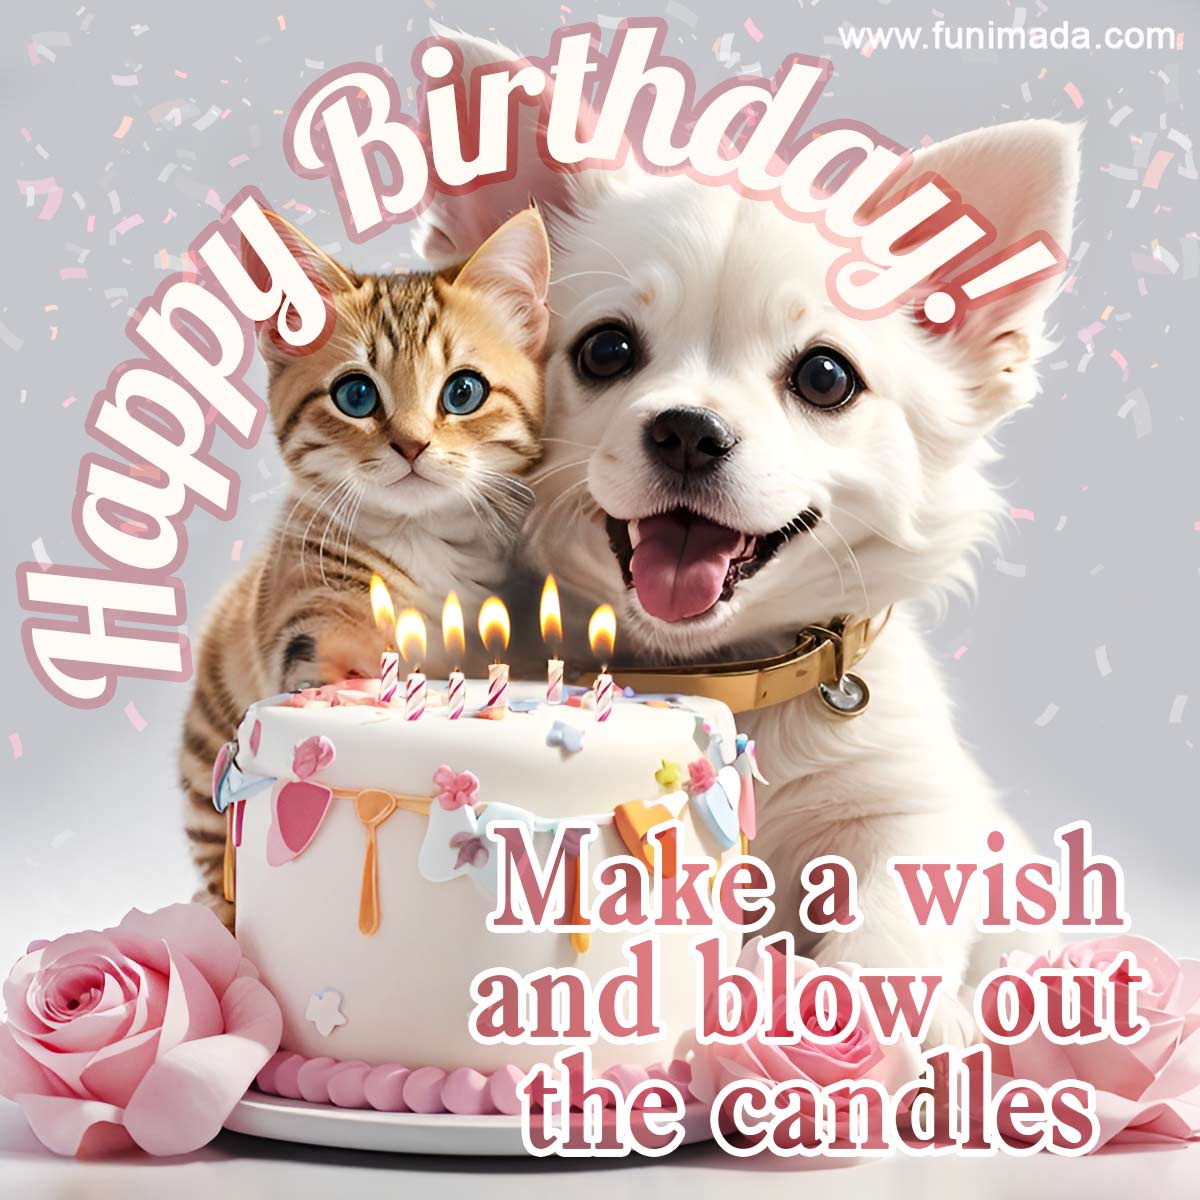 Make a wish and blow out the candles. Cute kitten and puppy and a birthday cake.